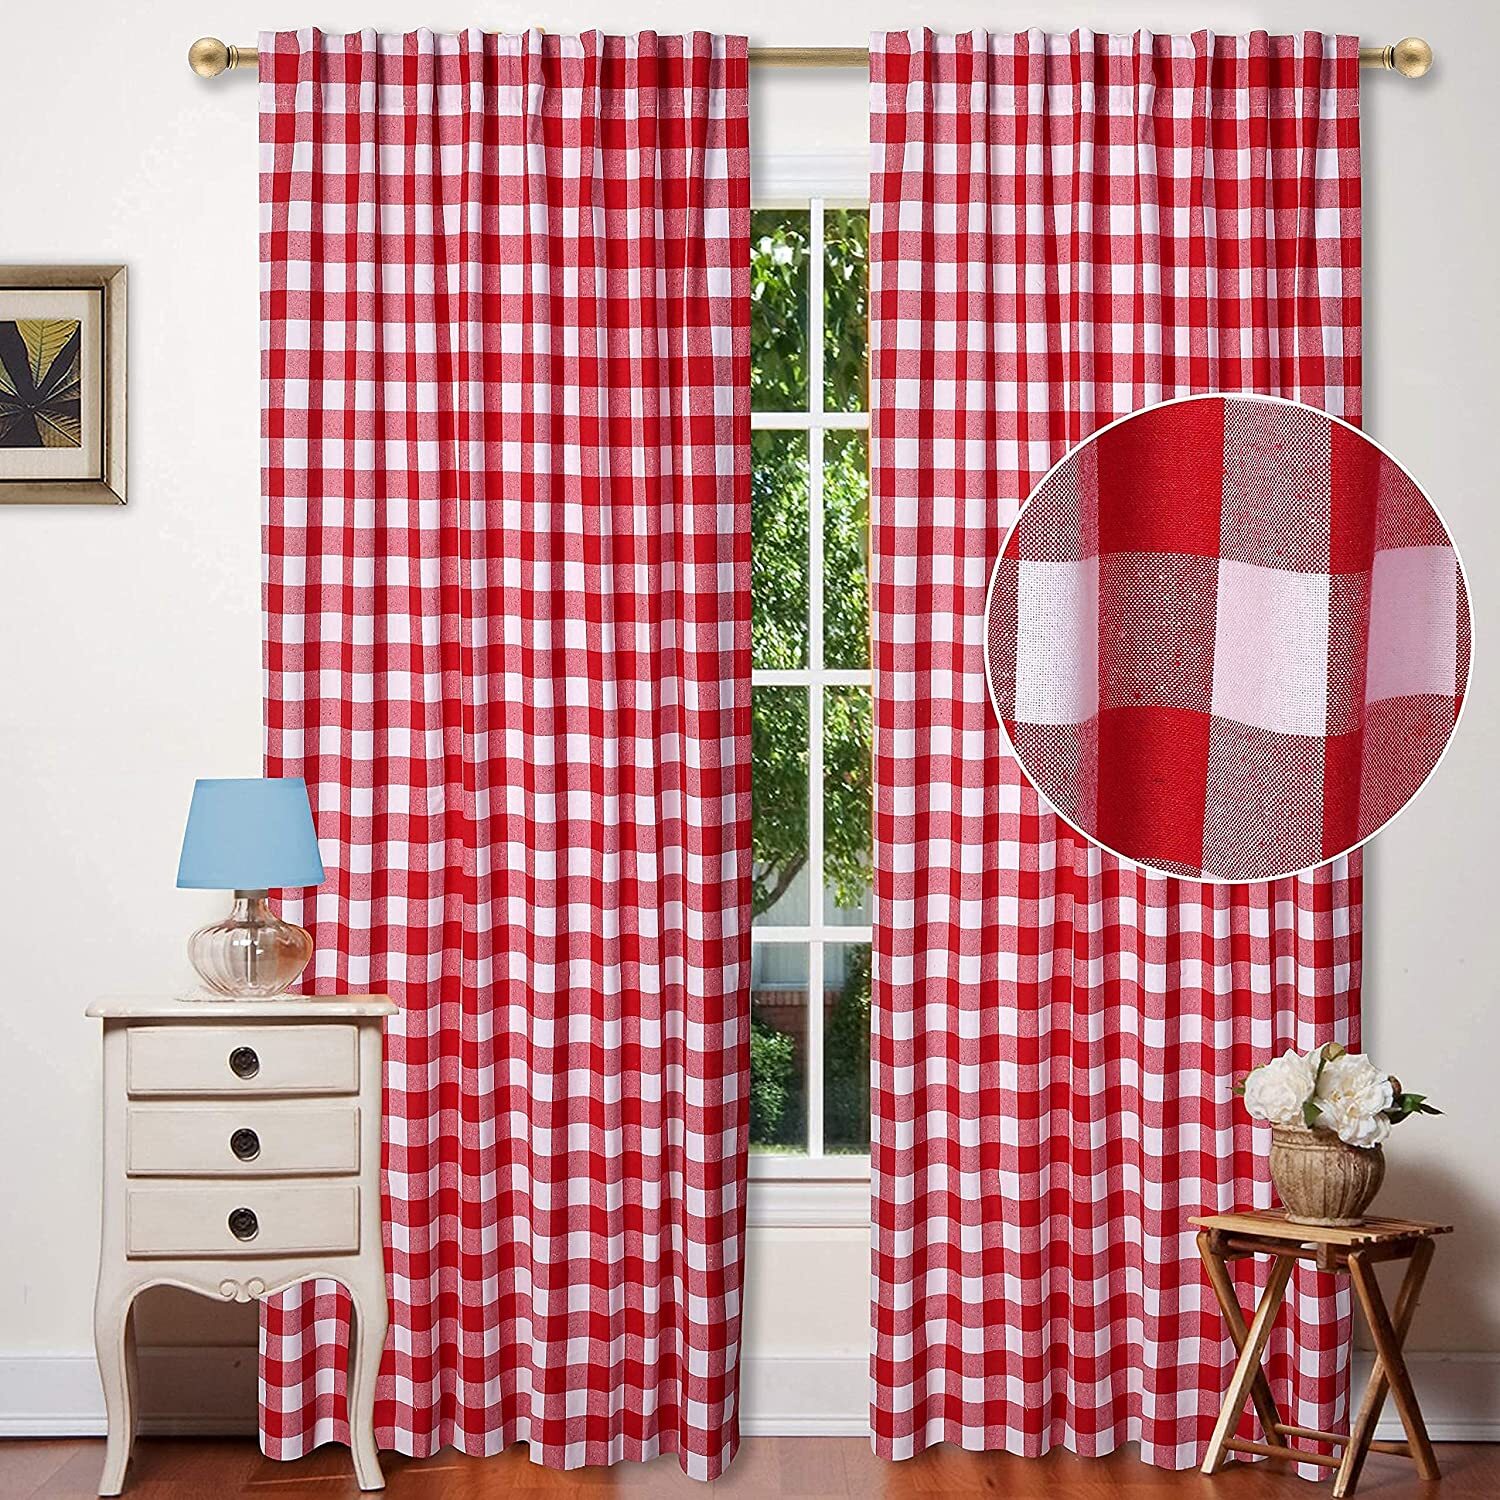 Iconic rustic curtains with a white and red plaid pattern